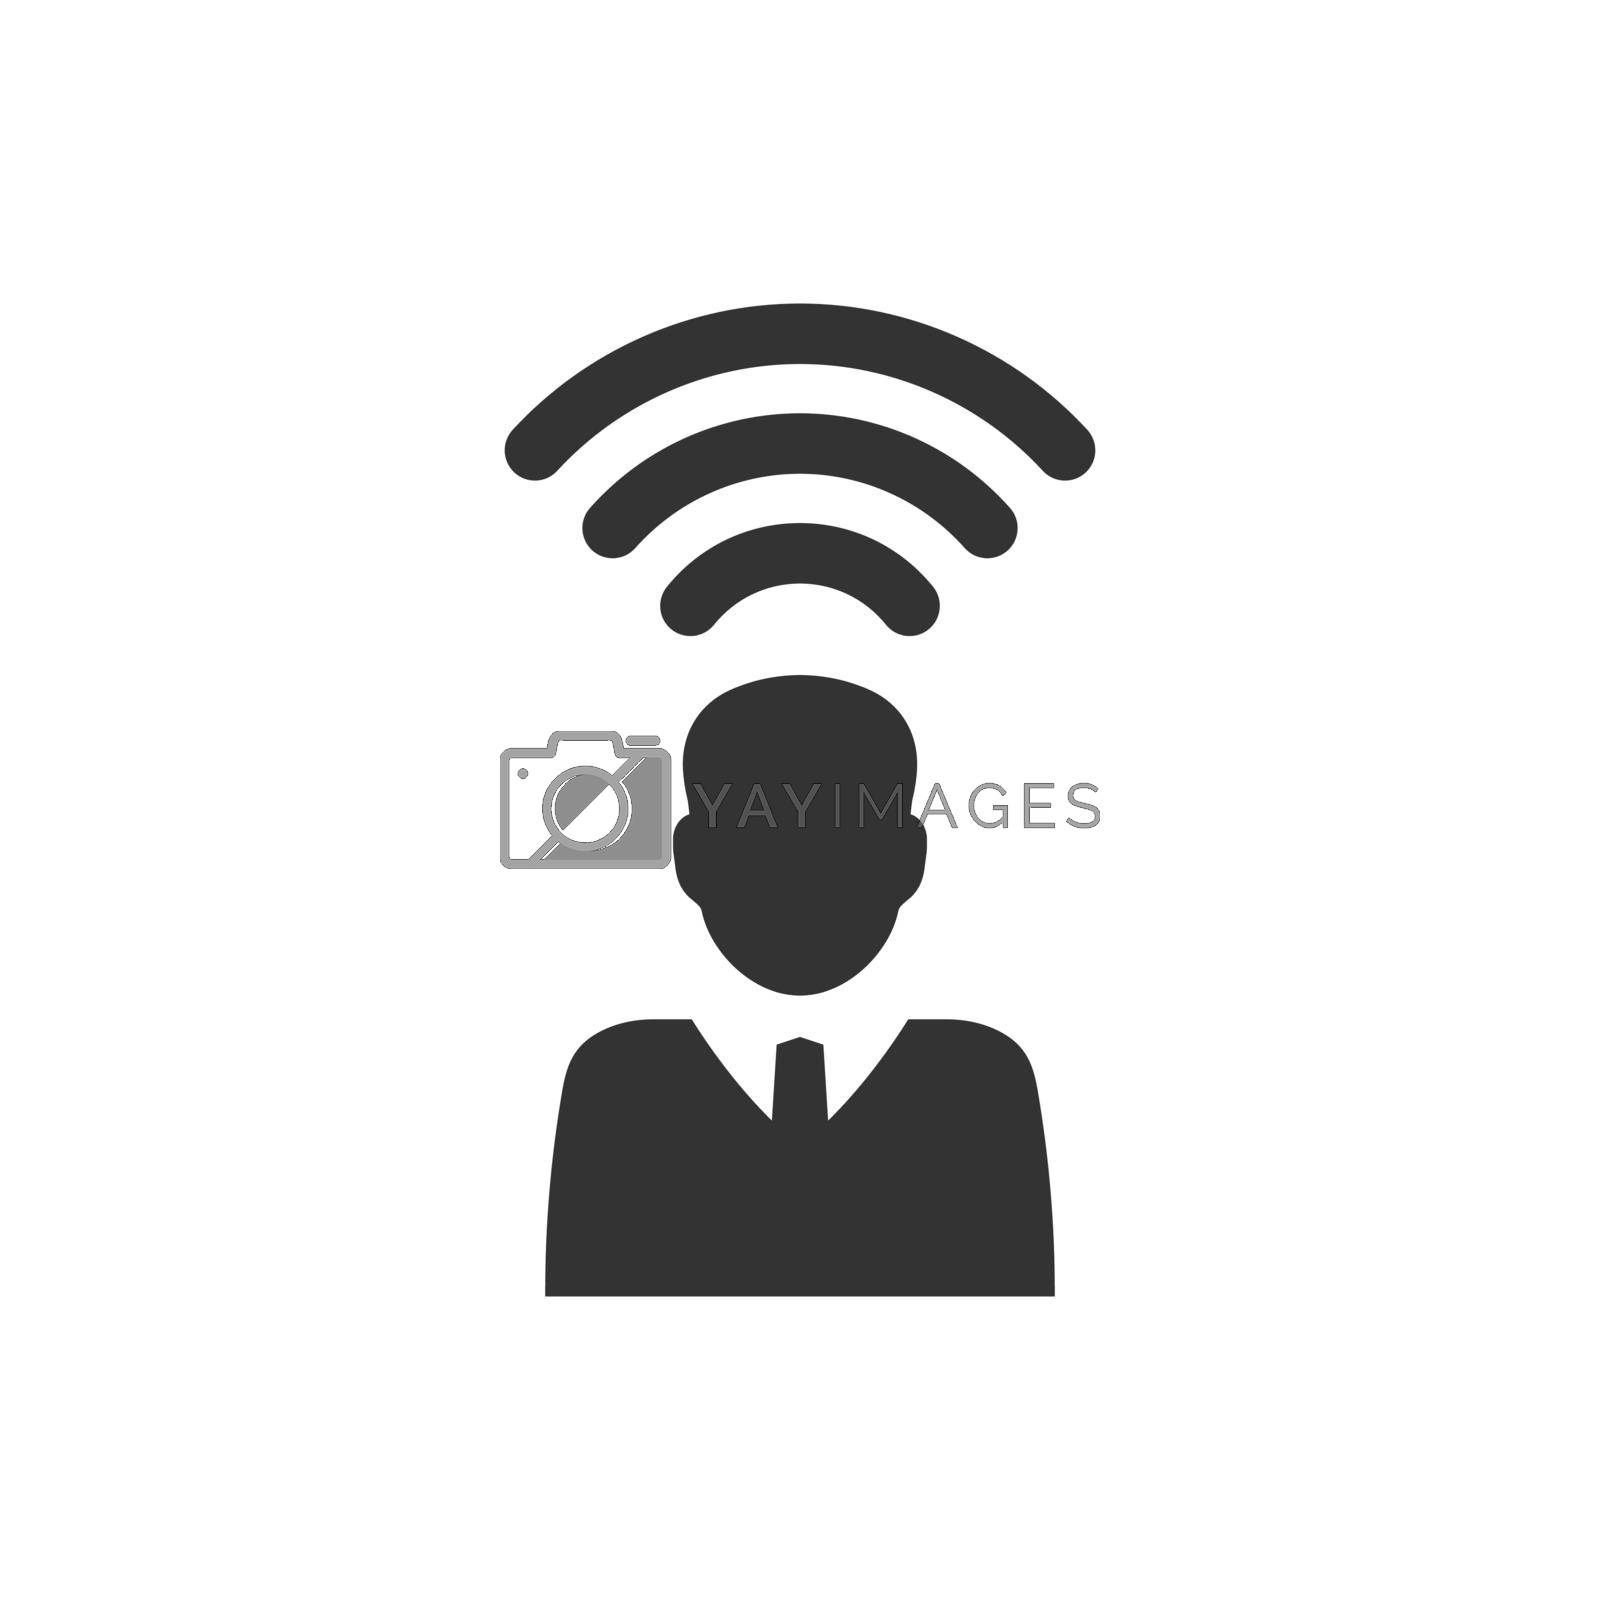 Royalty free image of Business communication icon  by delwar018